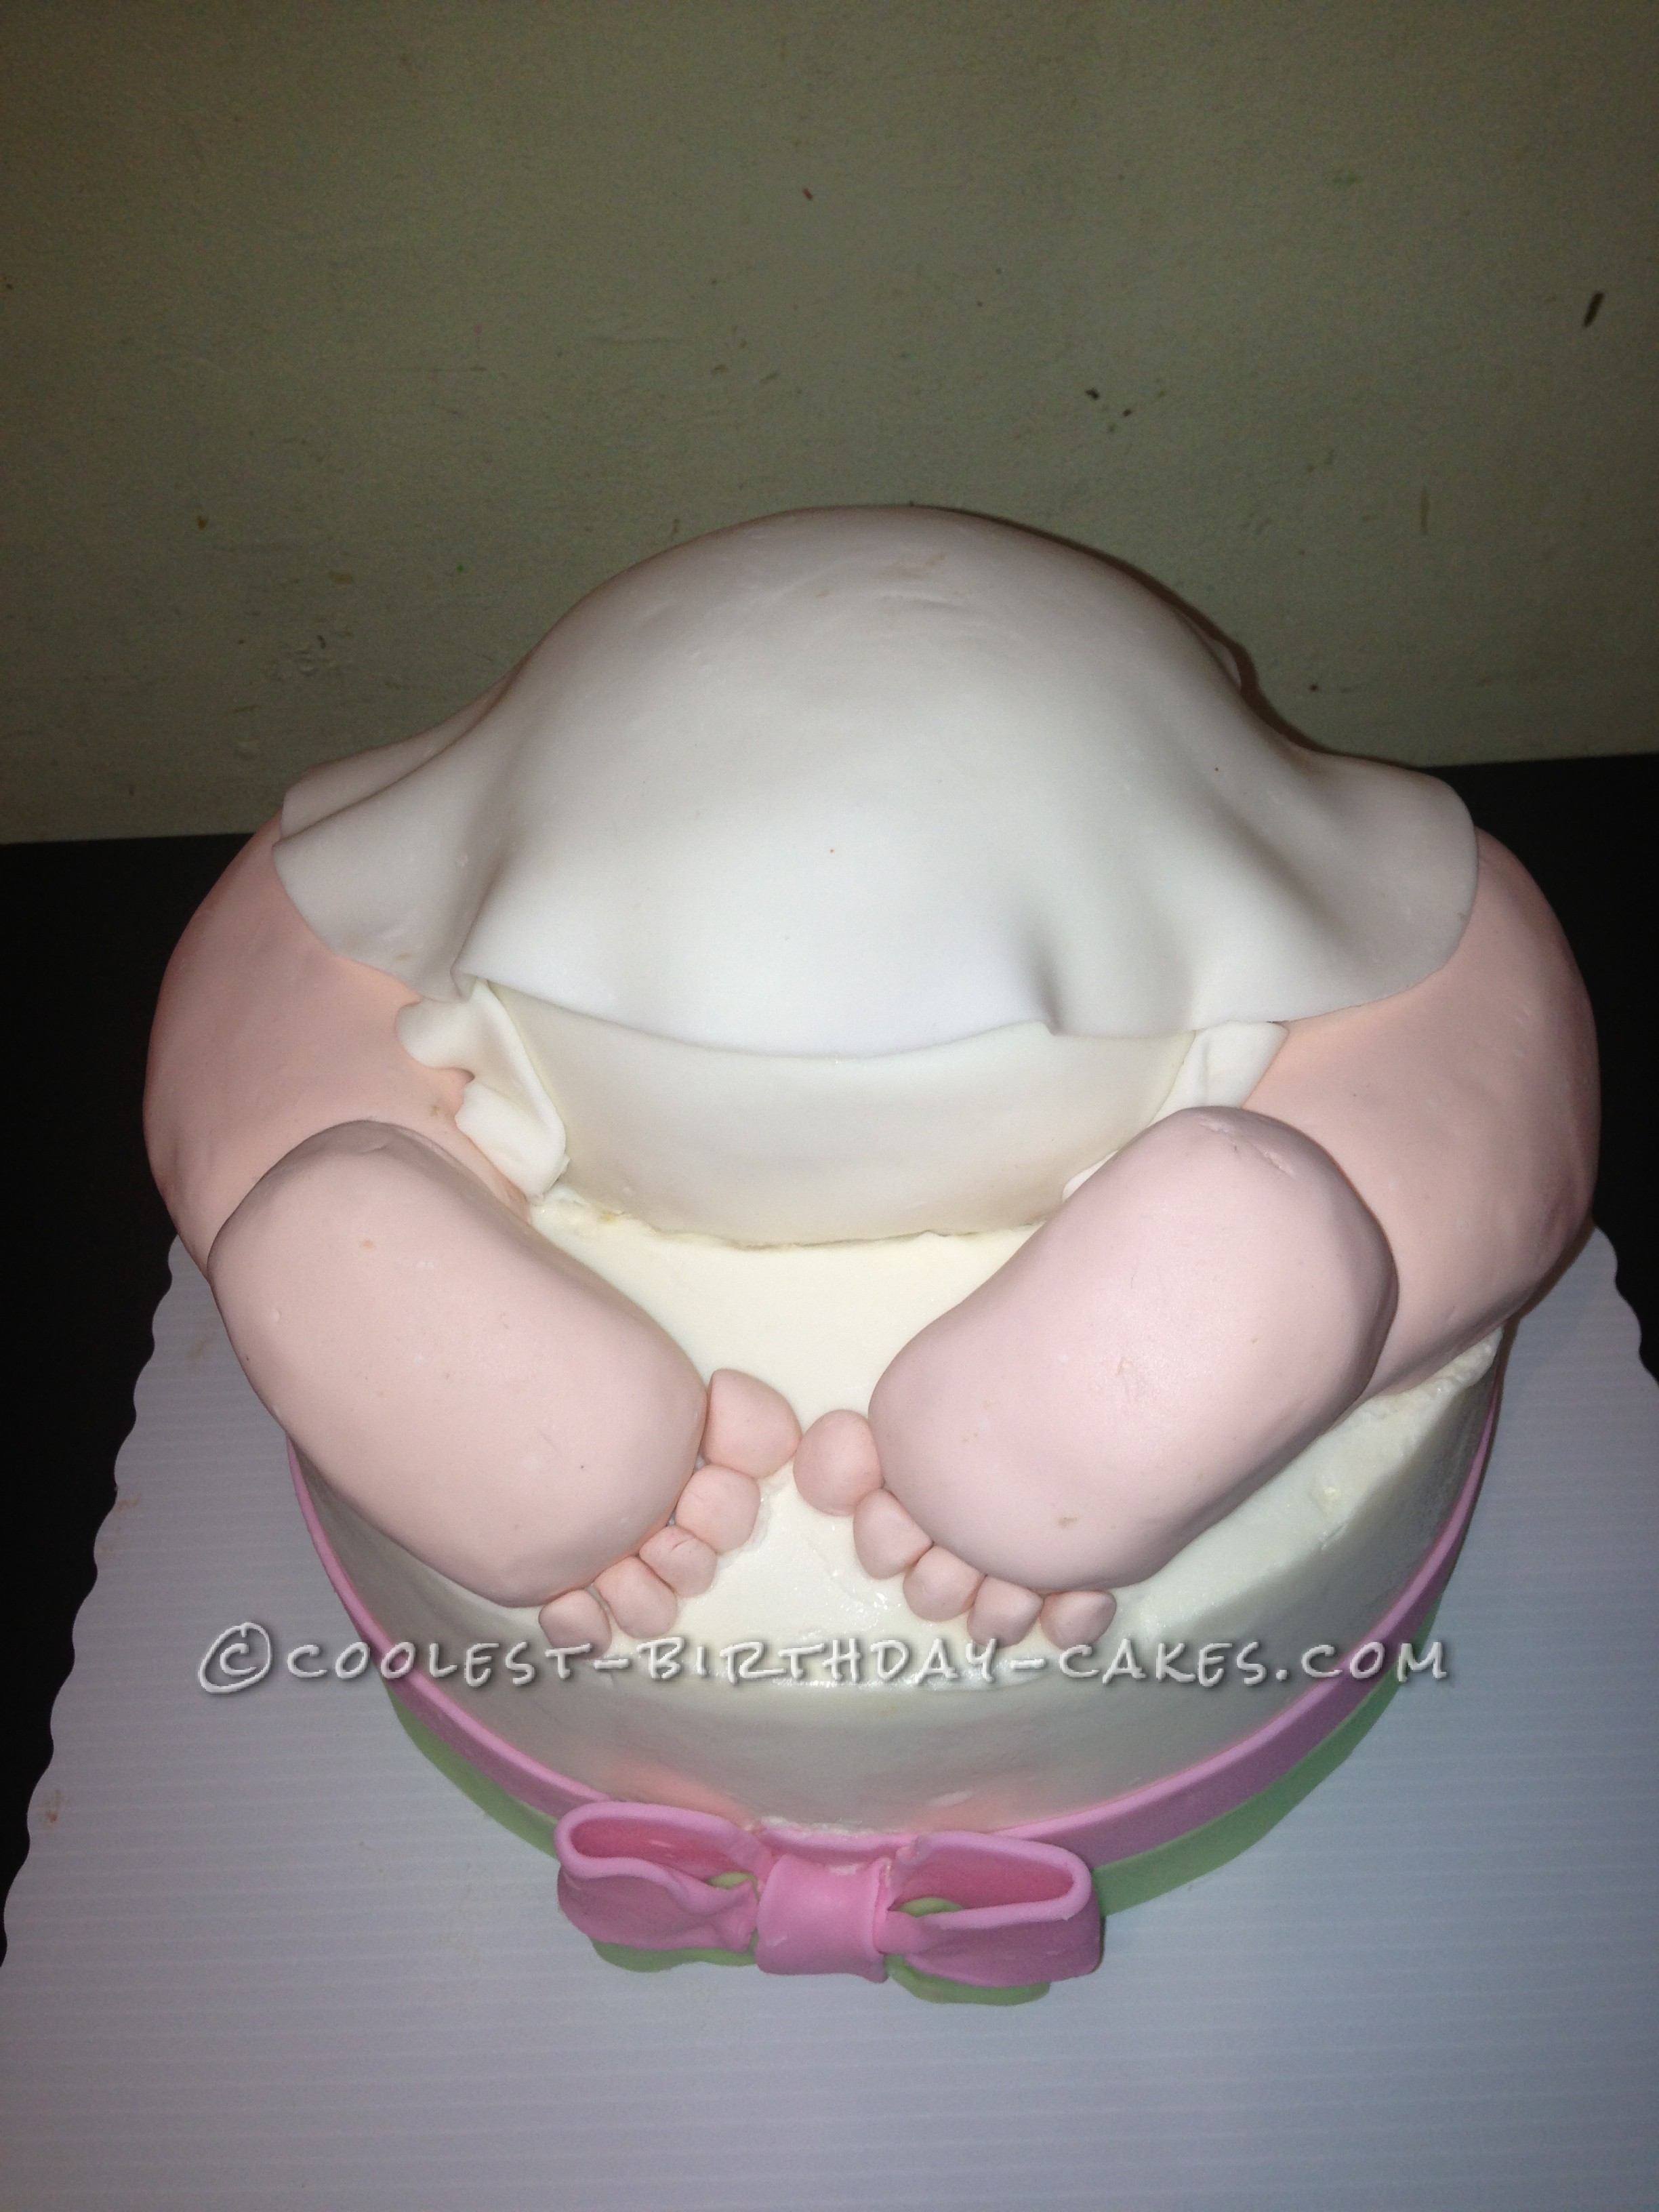 Coolest Baby Bun Cake for a Baby Shower